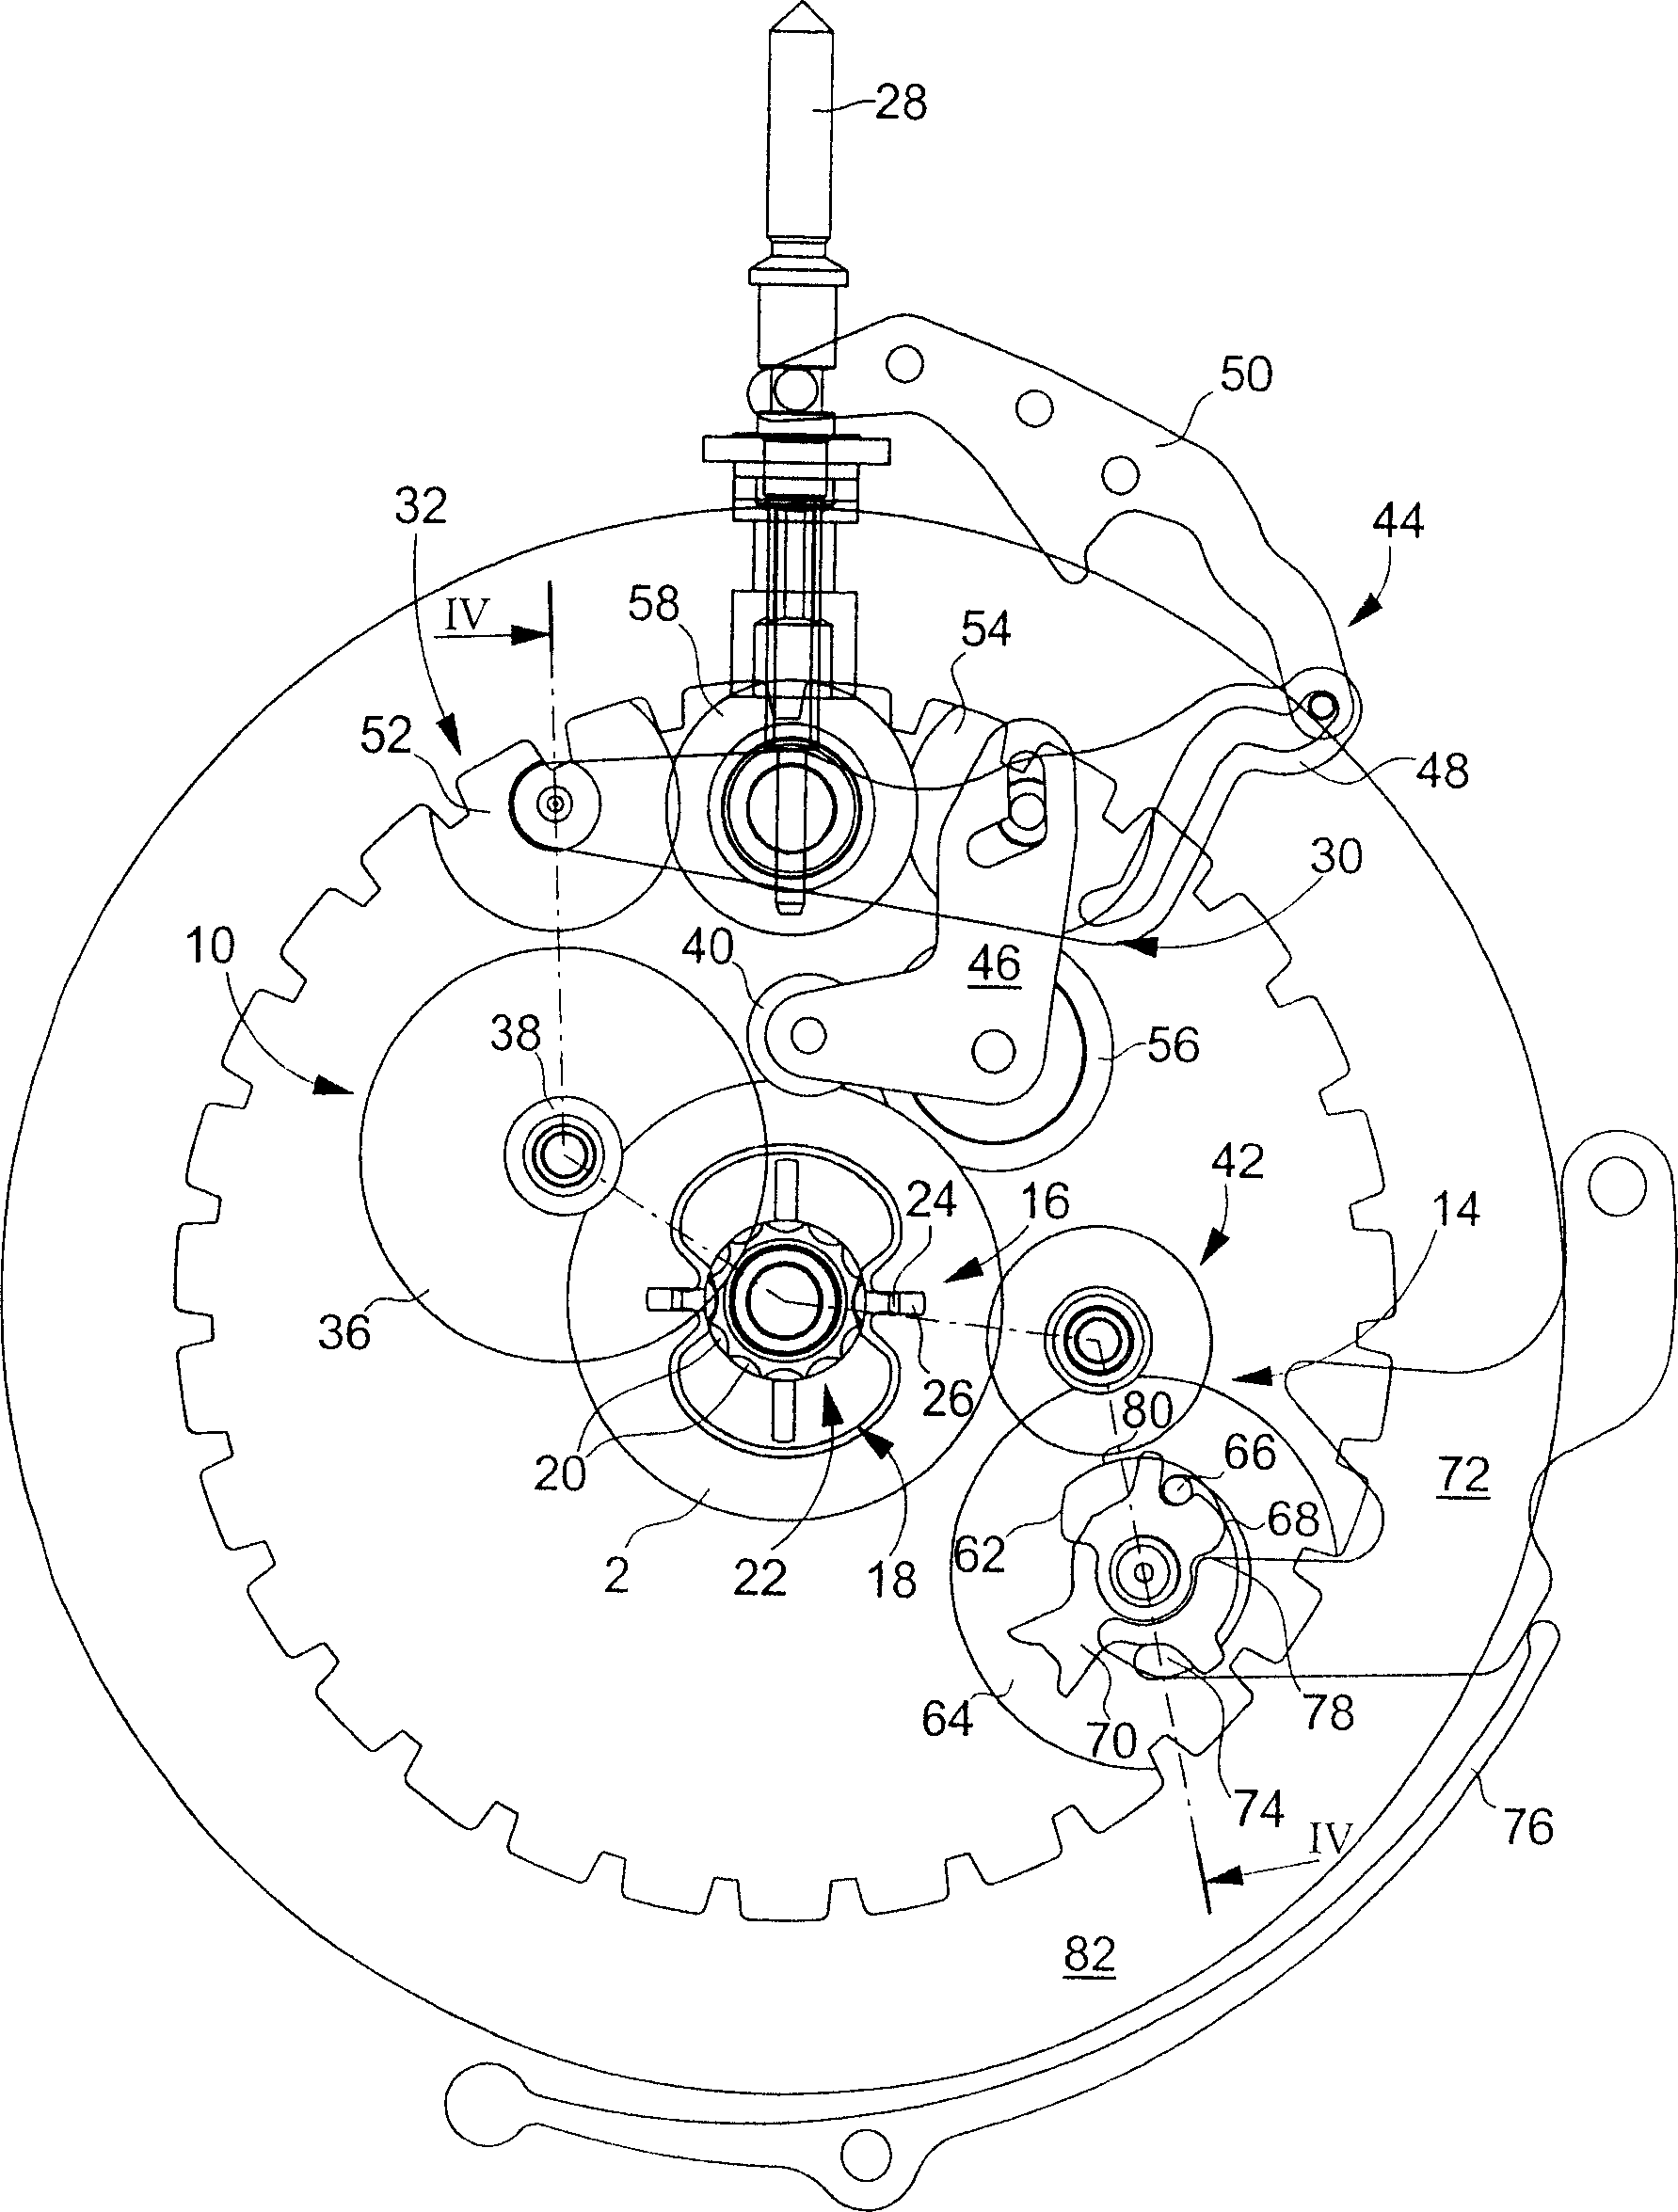 Timepiece with an hour hand able to be moved forward or backward by one hour step